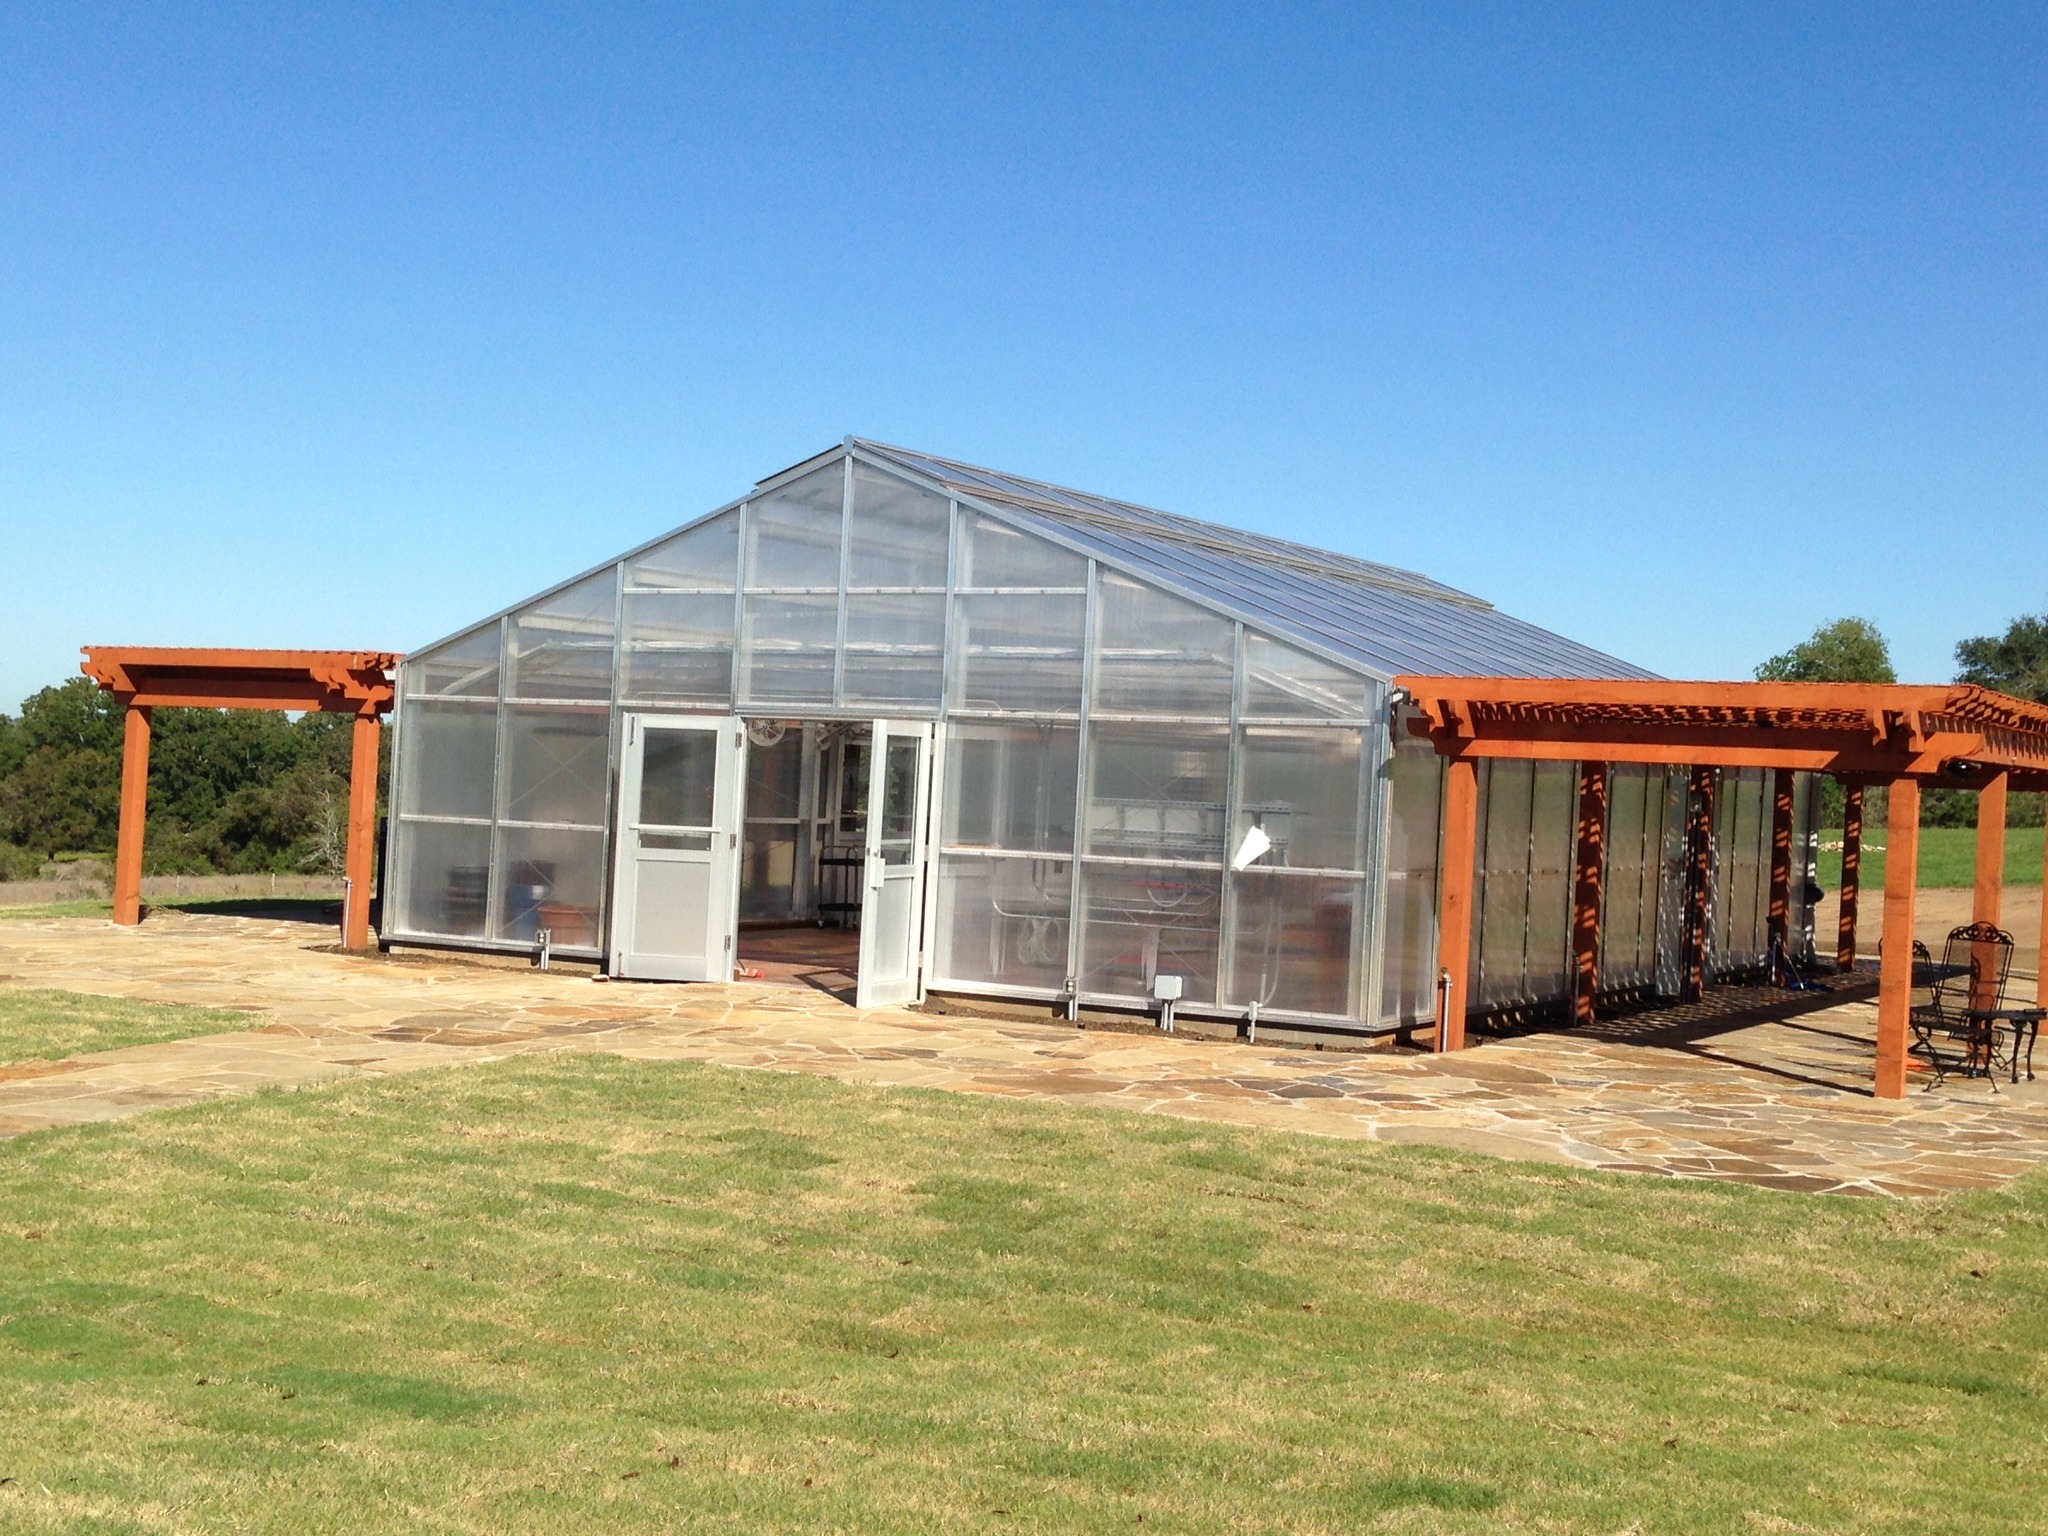 Commercial greenhouses